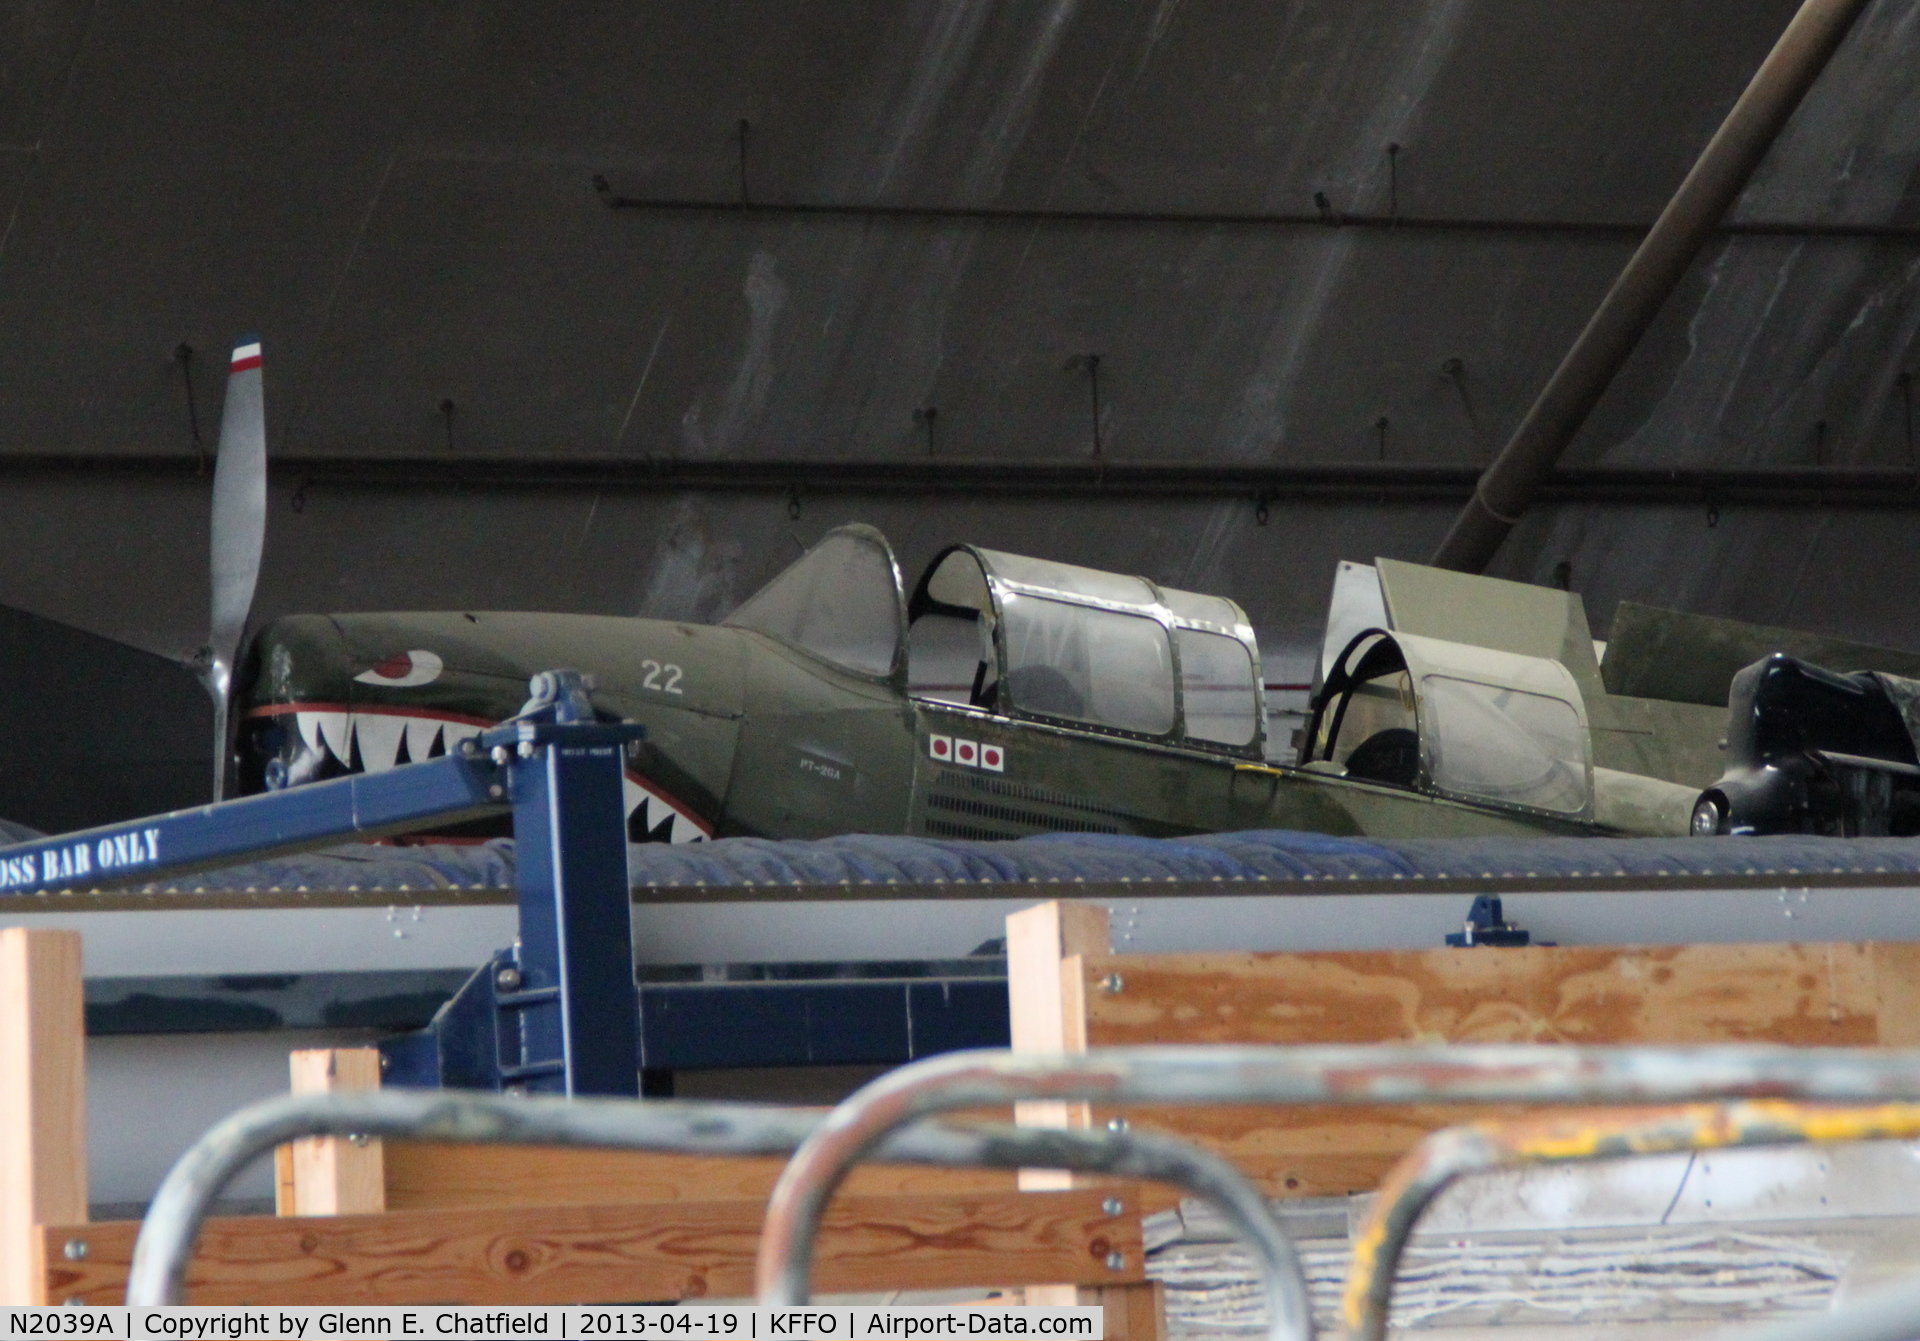 N2039A, 1957 Fairchild M-62A-4 C/N FC120, Stuffed up on a high shelf in the restoration facility